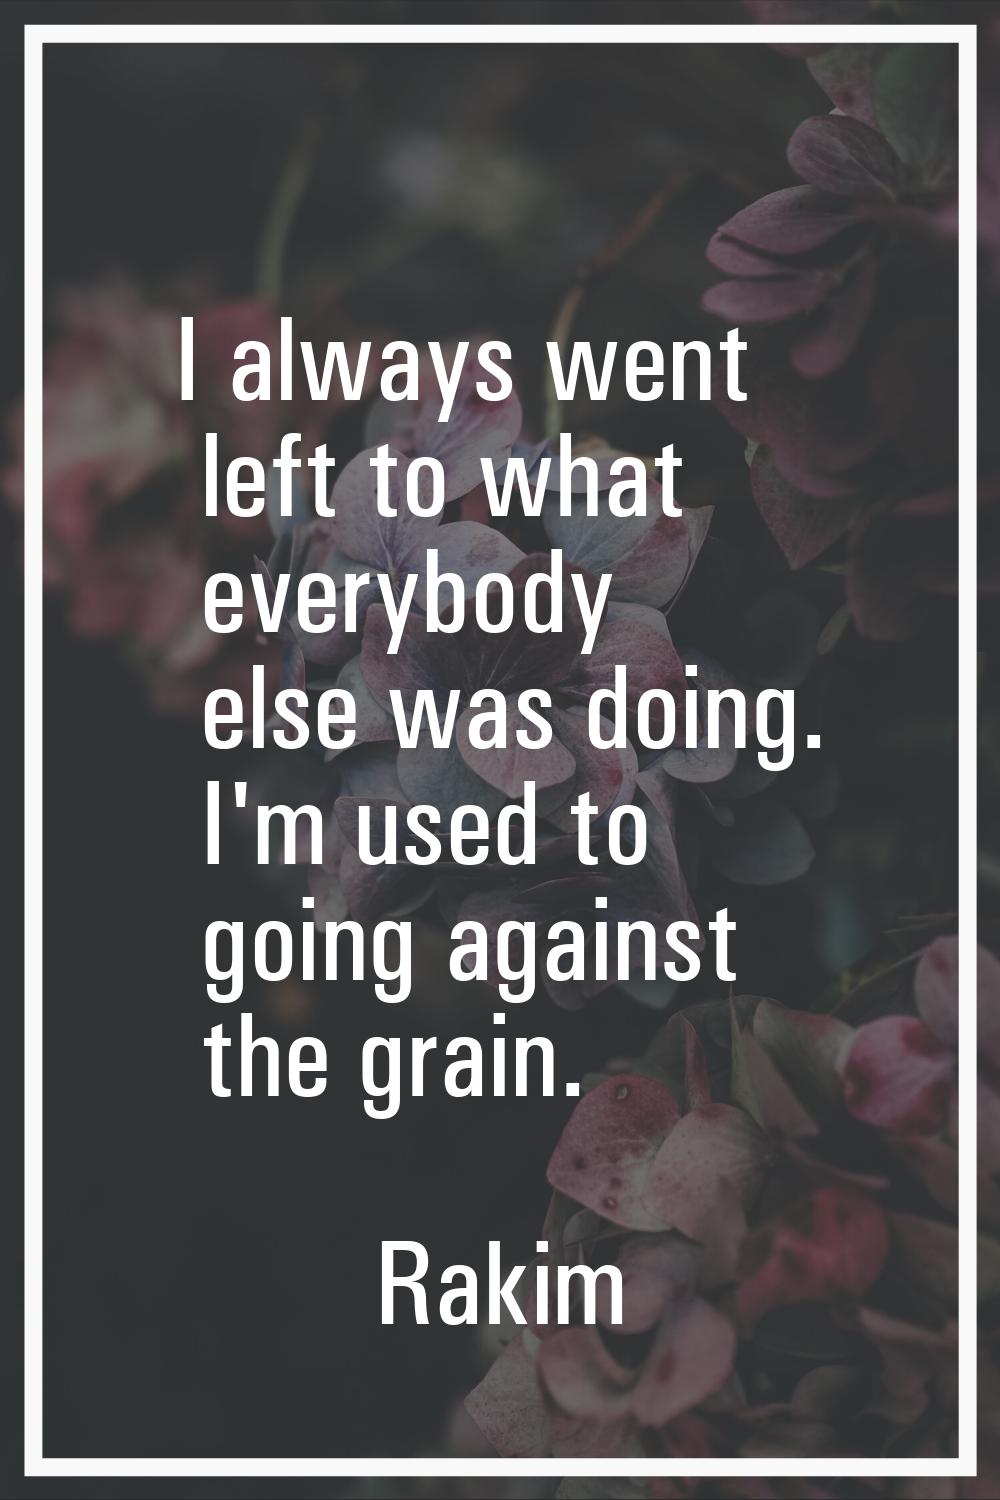 I always went left to what everybody else was doing. I'm used to going against the grain.